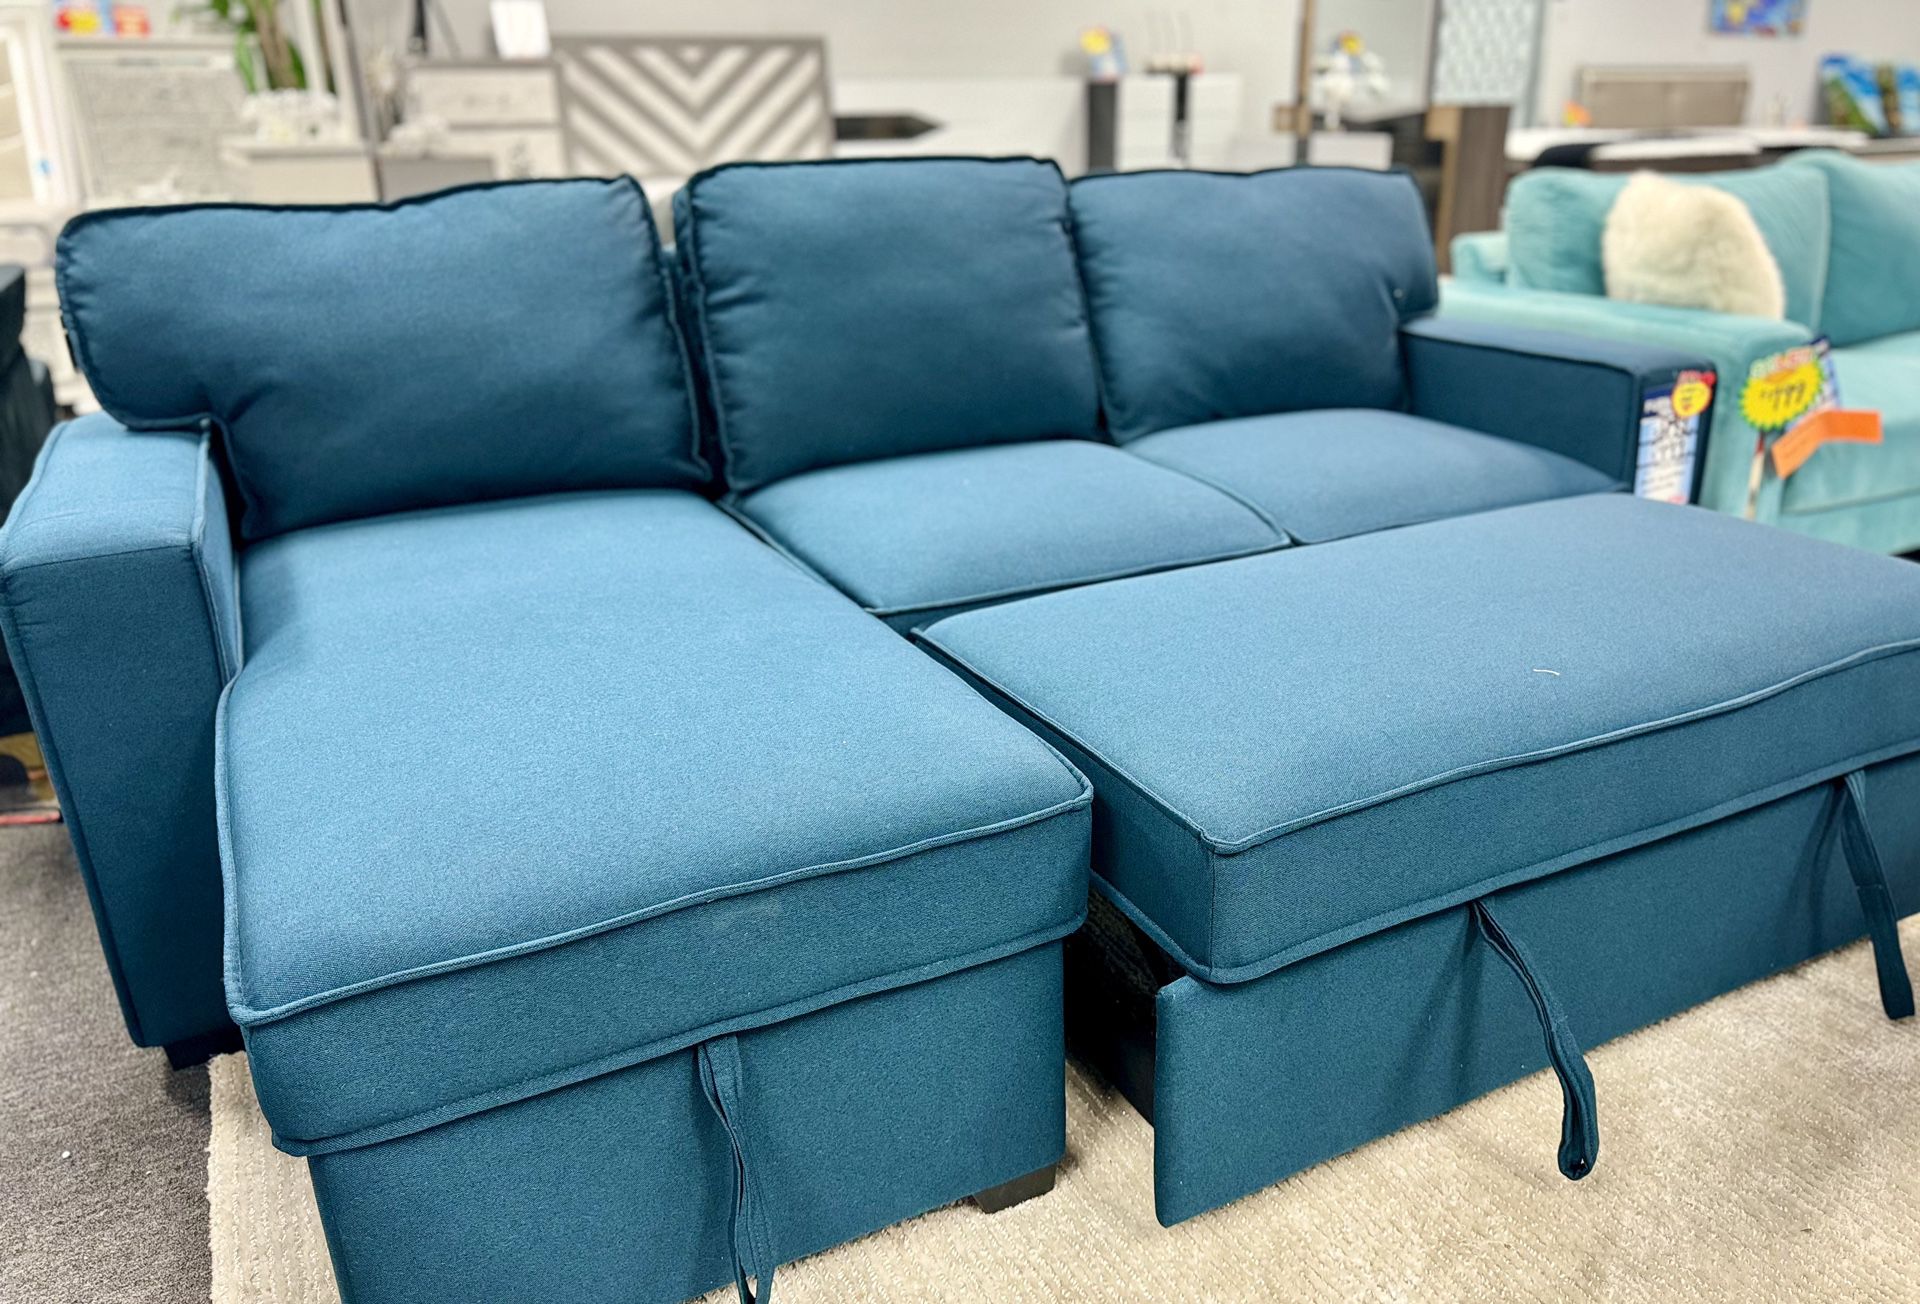 Weekend Deal 🚨Sleeper Sofa Sectional NOW 65% Crazy ✅Living Room Furniture Sale✅